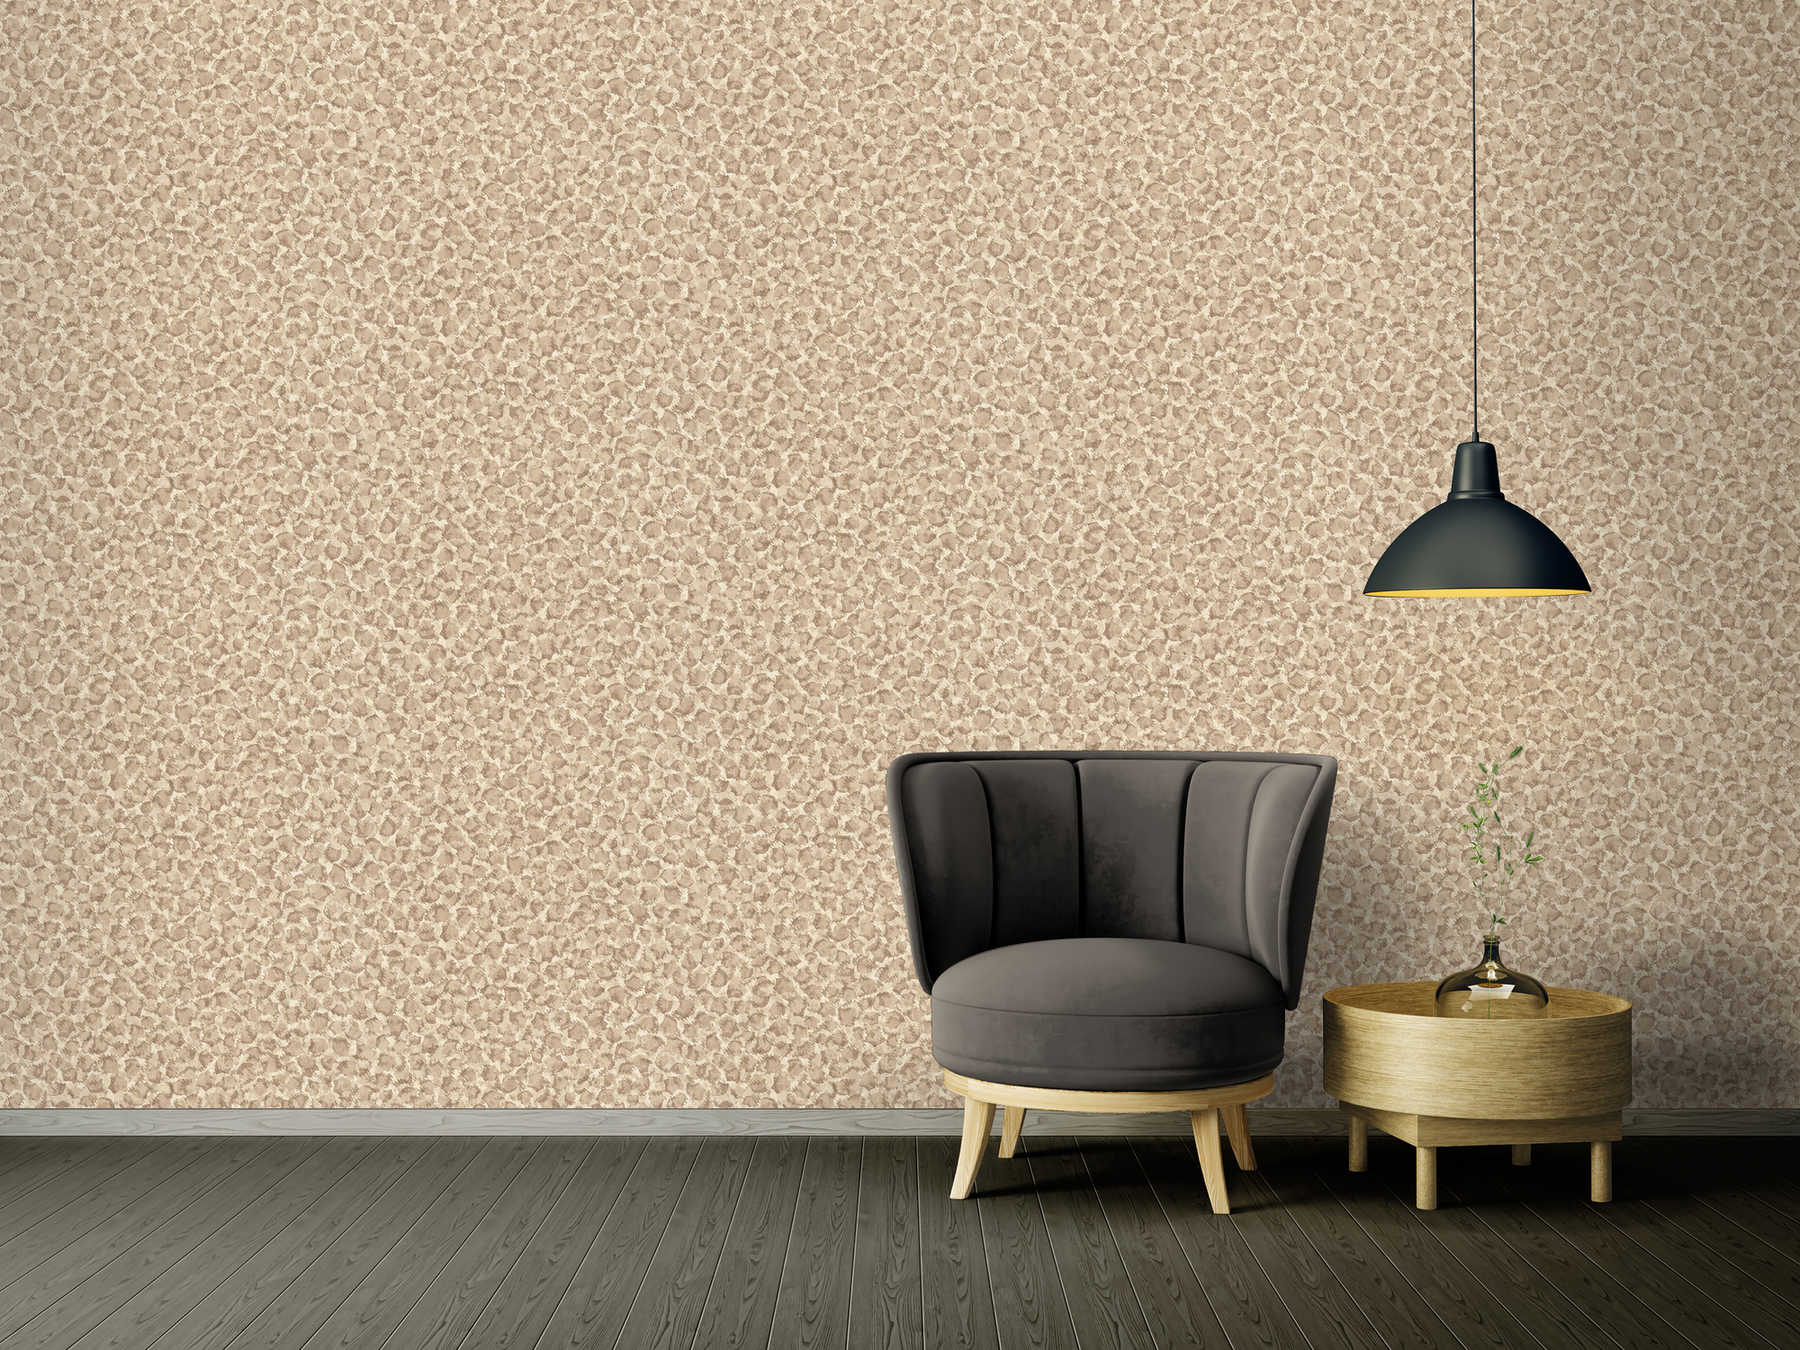             Non-woven wallpaper polka dots in earth tones in Ethnor style - beige, brown
        